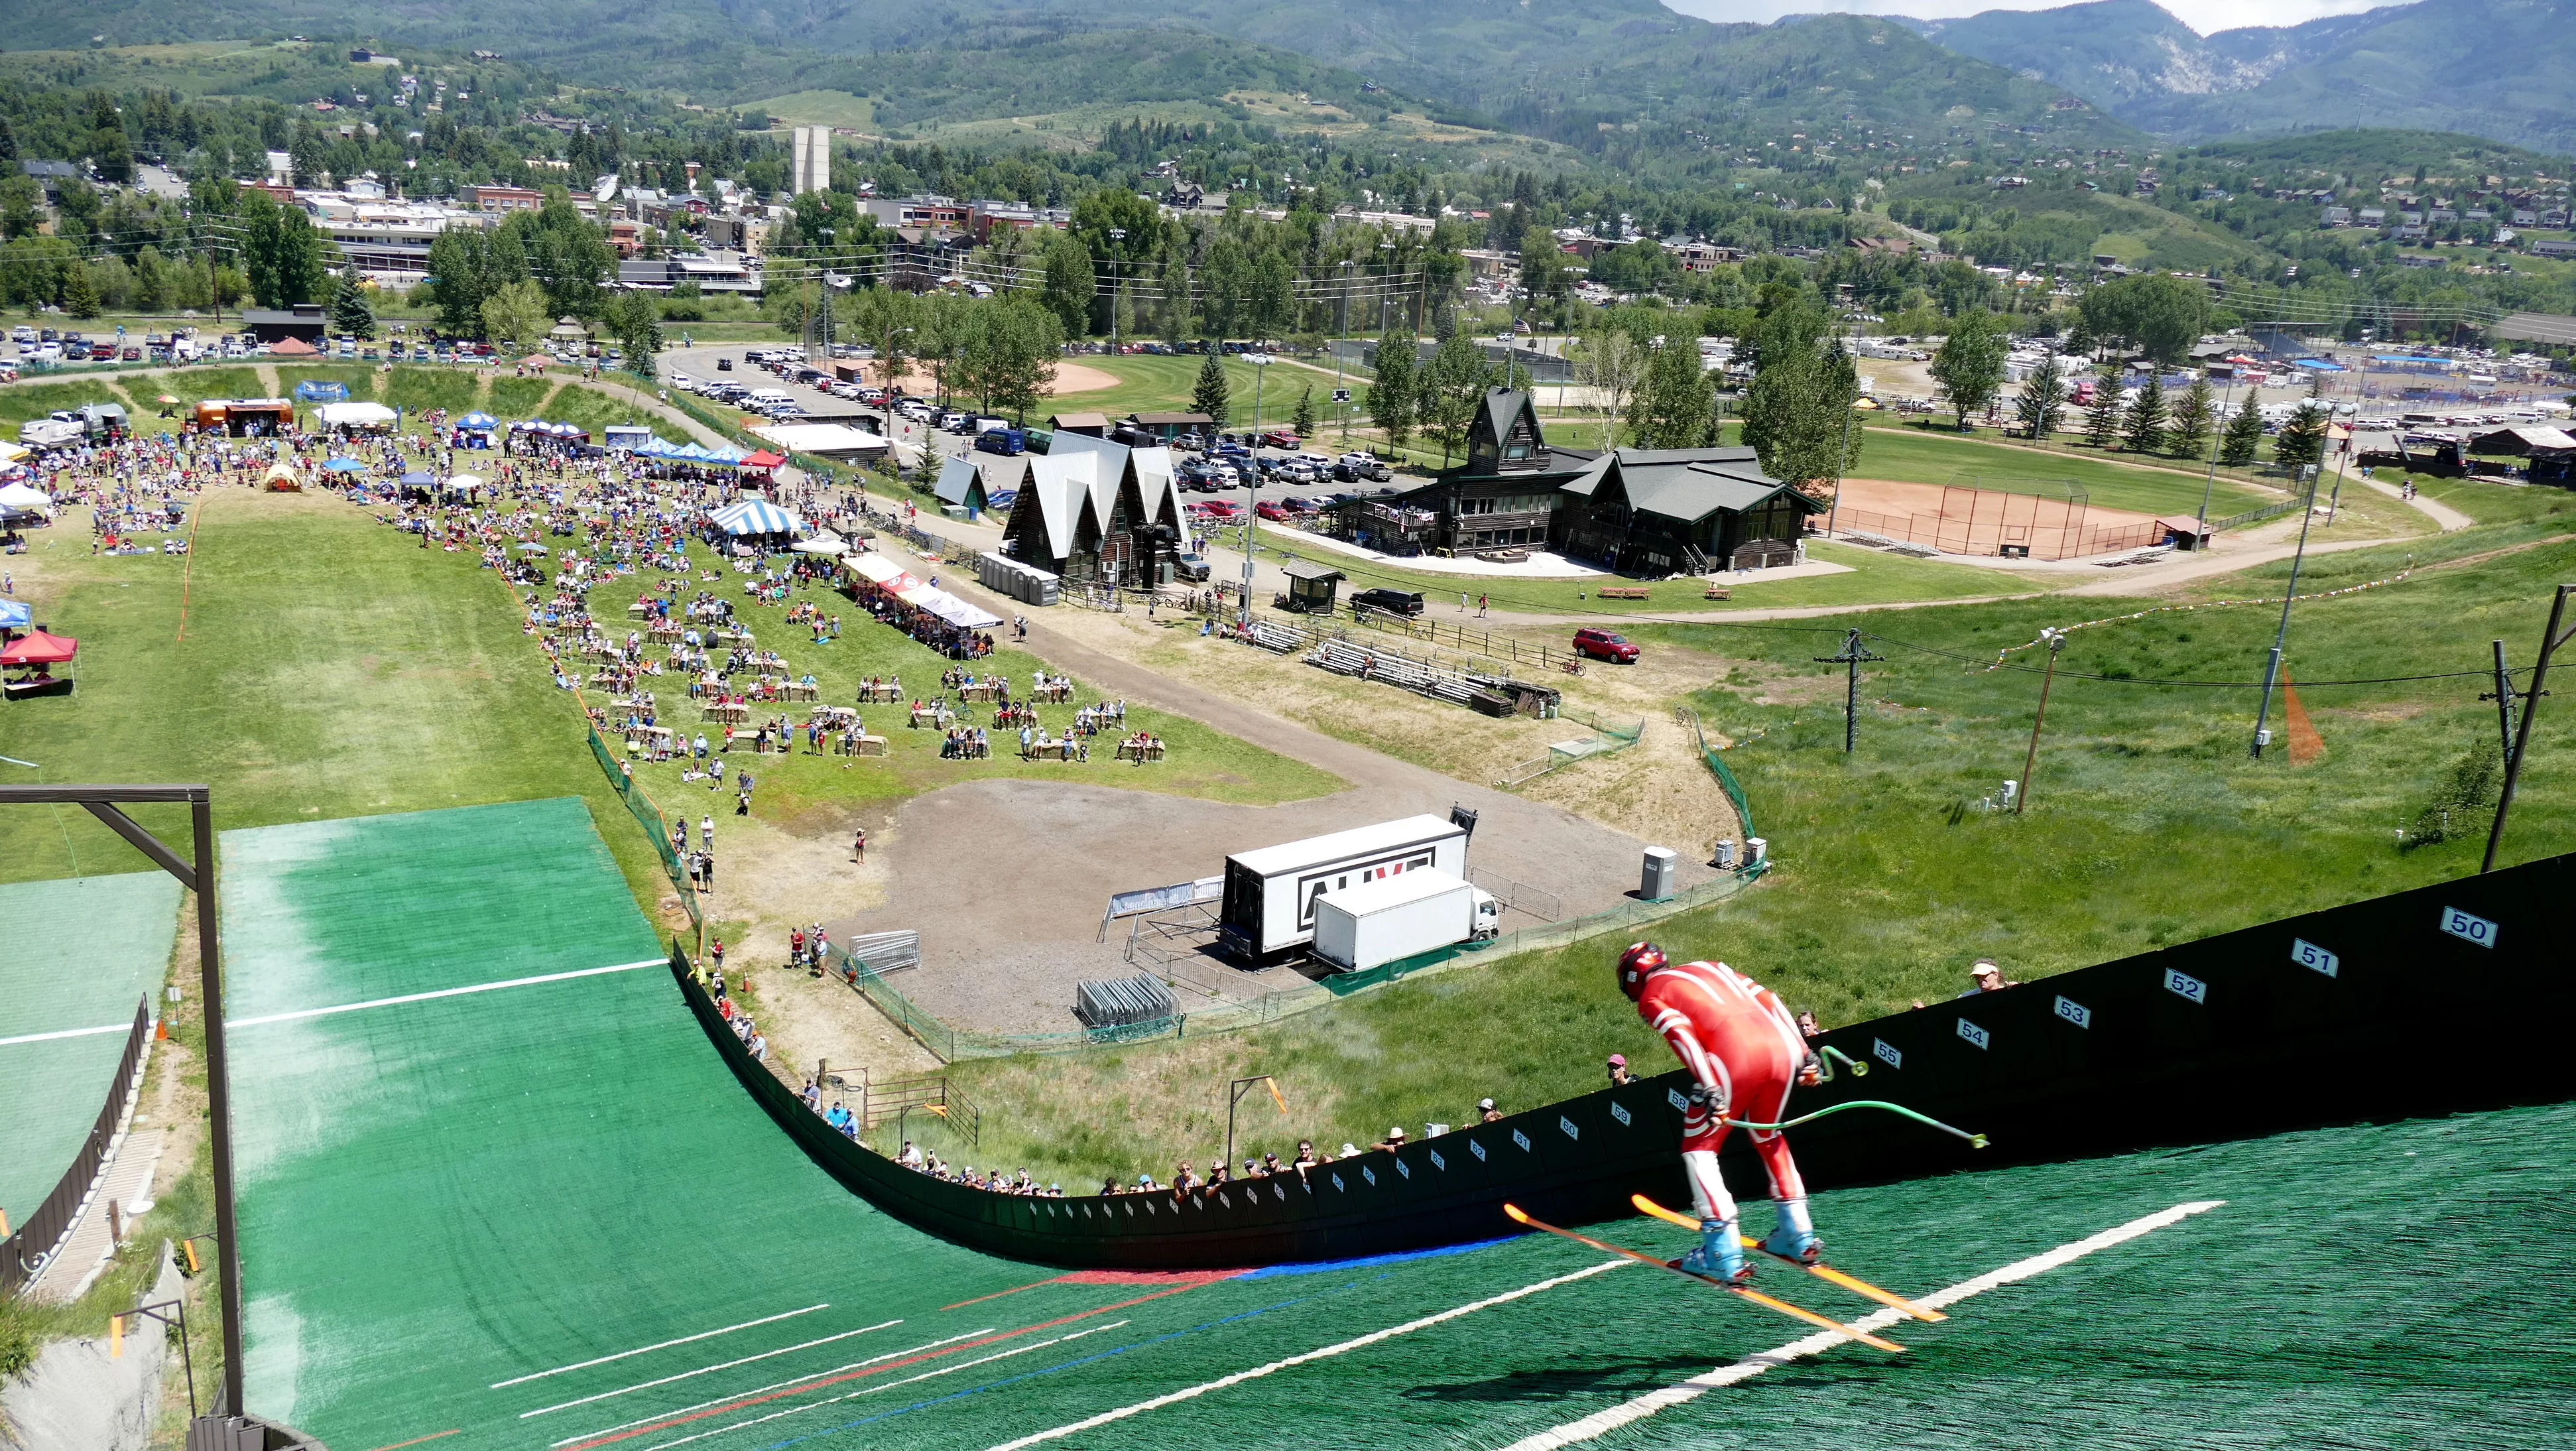 nordic-jumping-over-howelsen-hill-4th-of-july